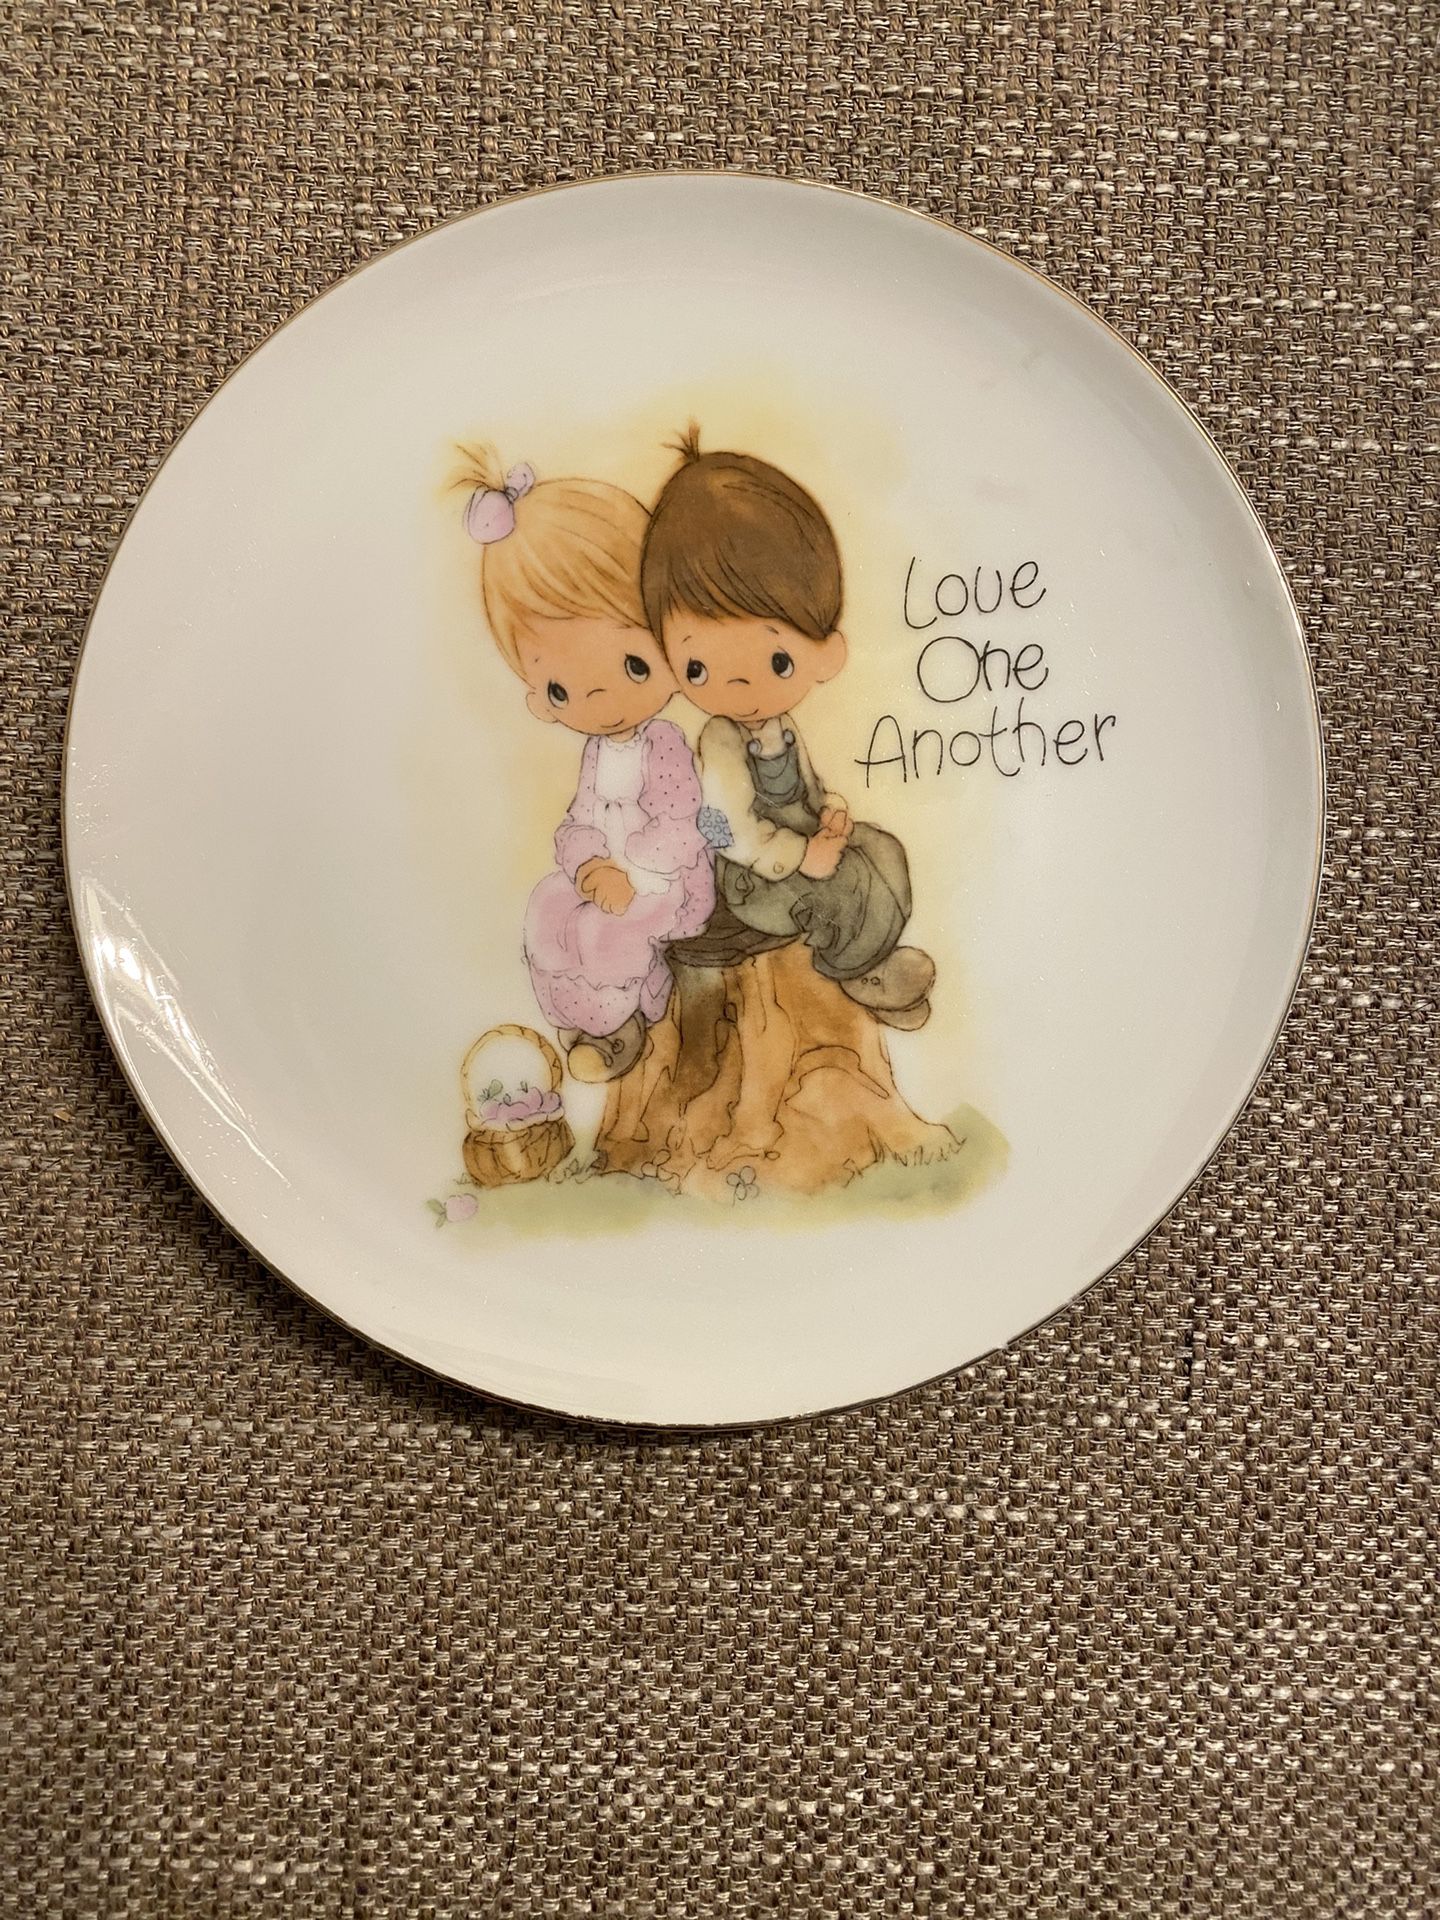 PRECIOUS MOMENTS “LOVE ONE ANOTHER” PLATE 1978